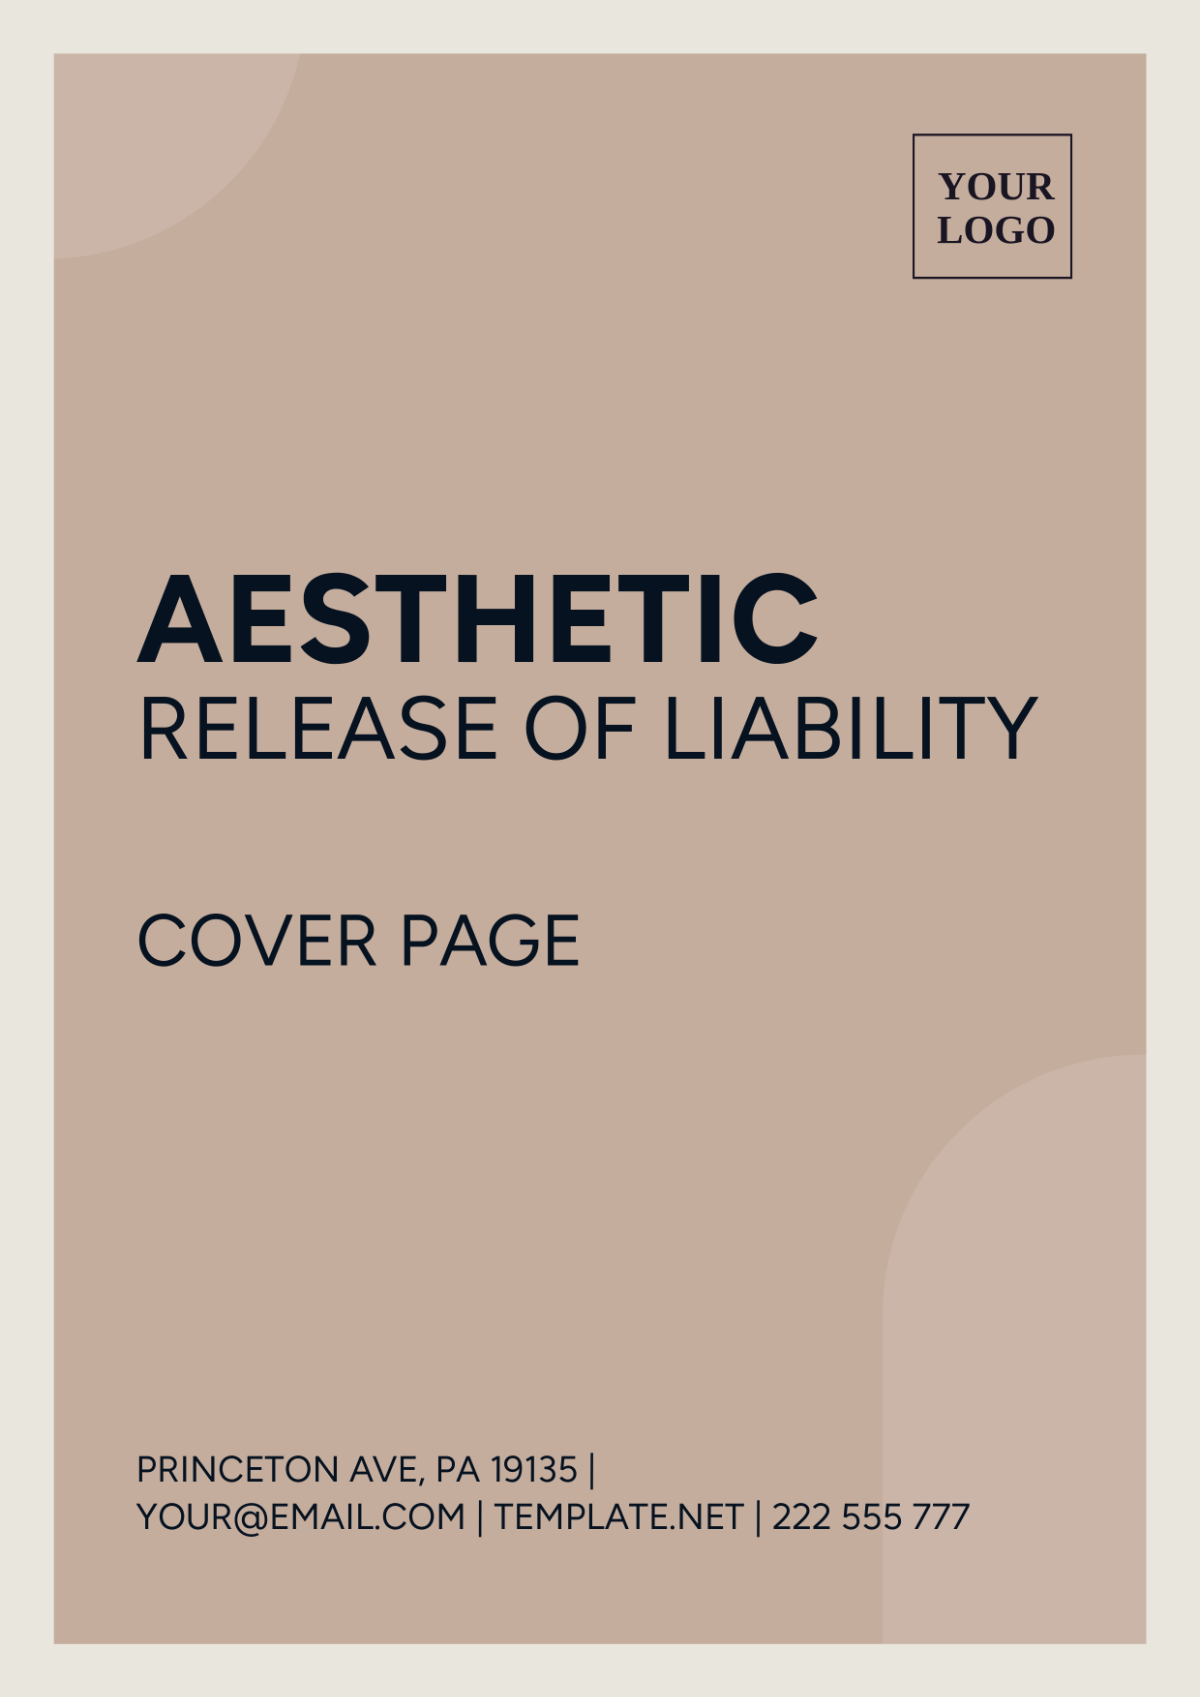 Aesthetic Release of Liability Cover Page